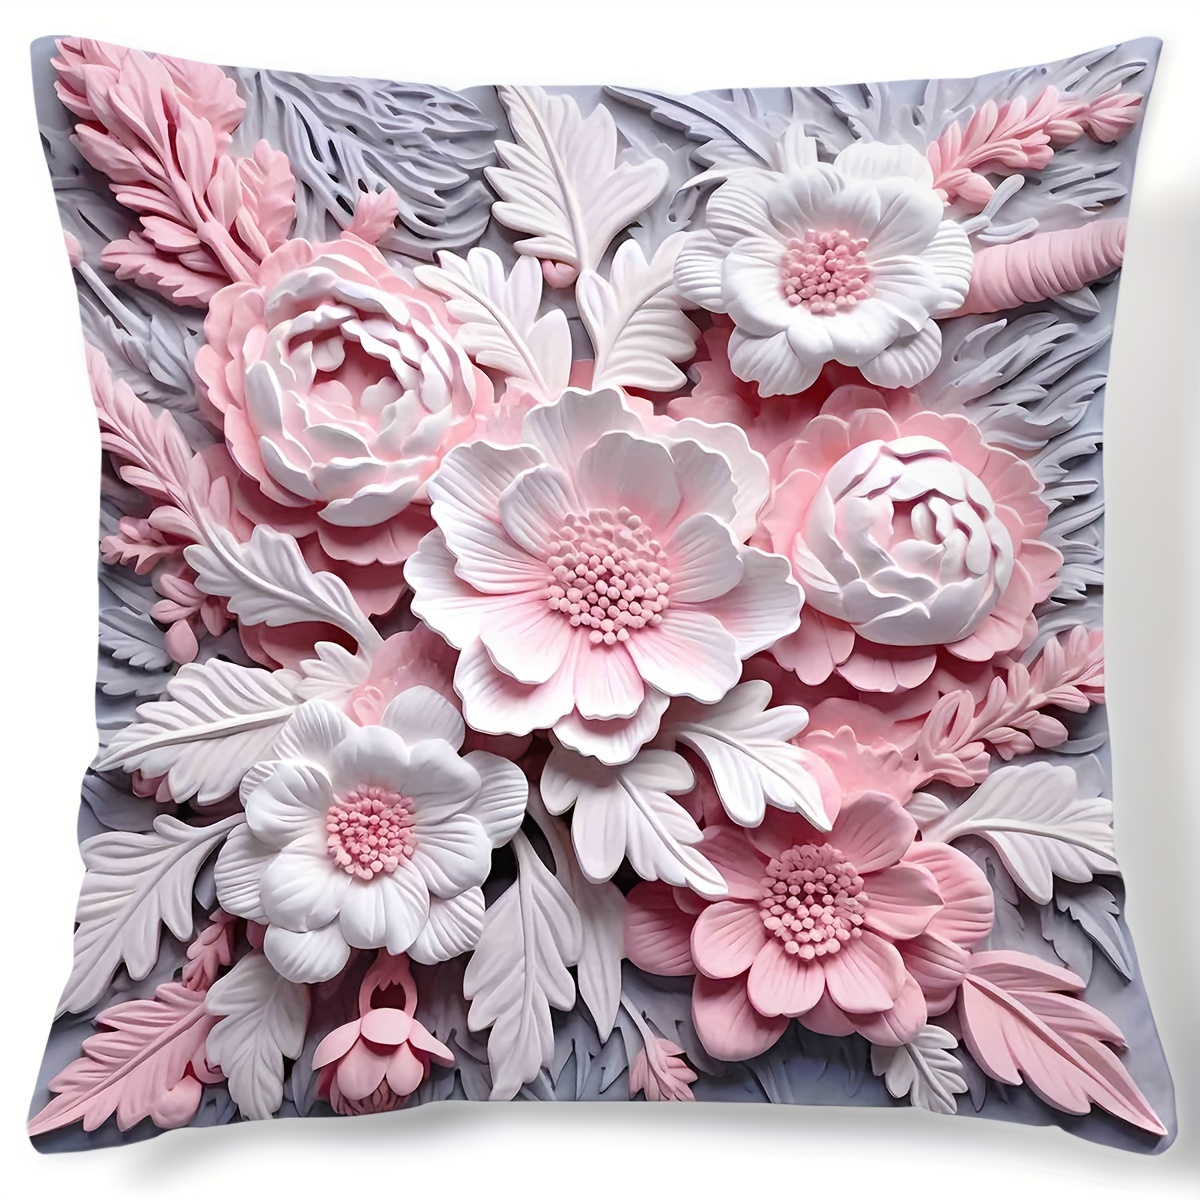 

1pc Contemporary Style 3d Floral Pattern Digital Print Pillow Cover 18x18 Inches, Decorative Square Cushion Case For Home Sofa And Bedroom Decor